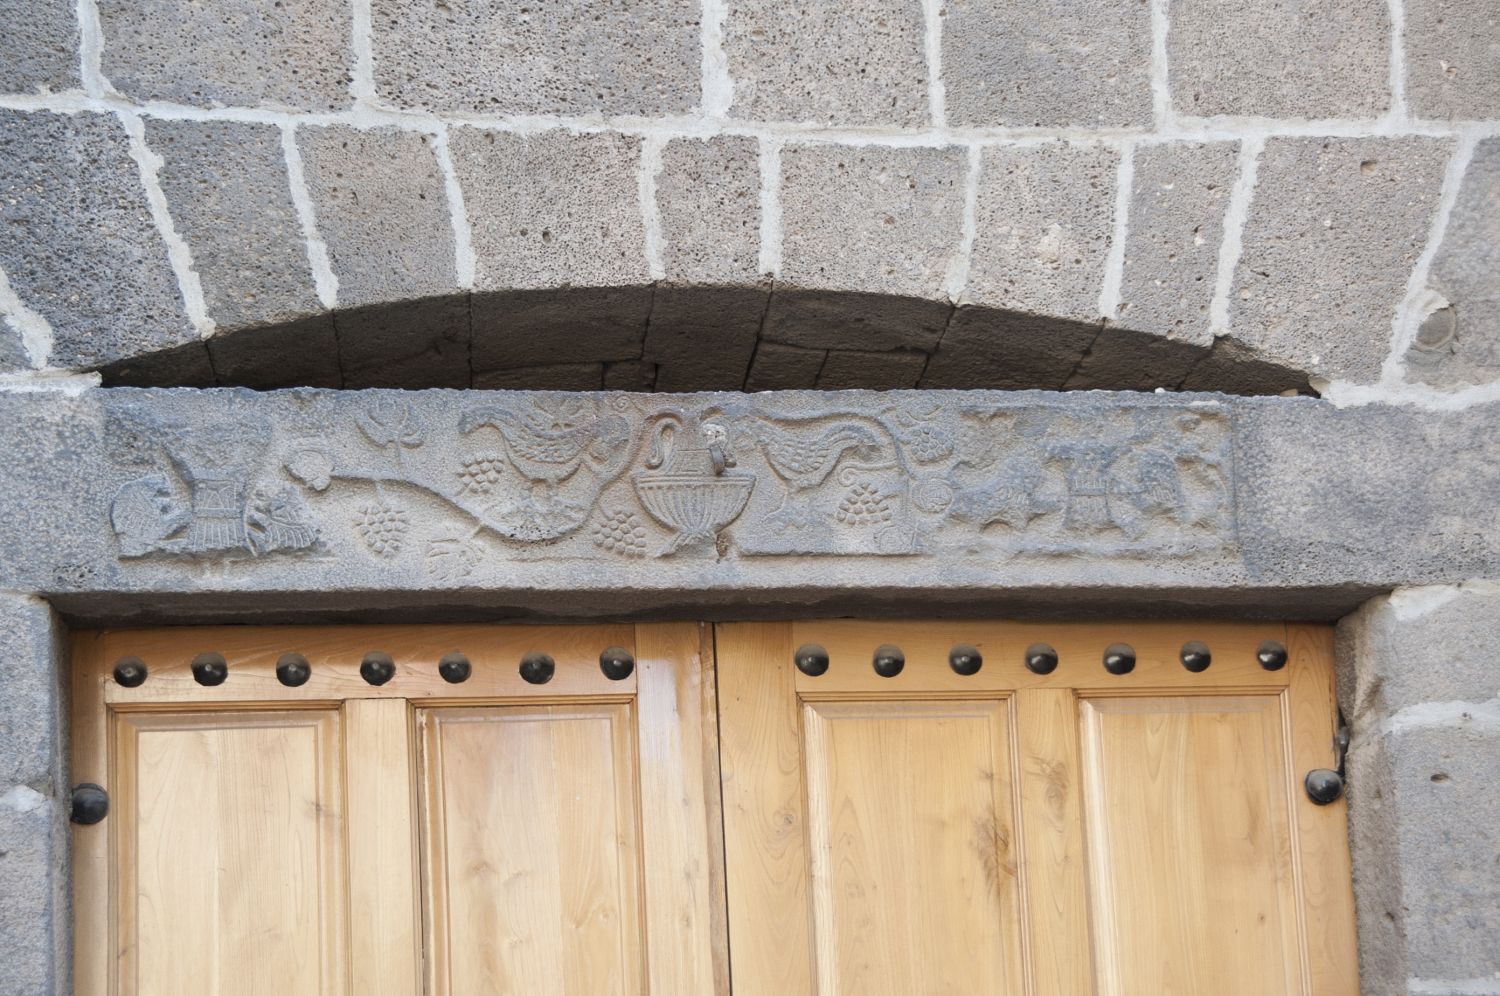 View of door lintel with carved vine scroll ornament.